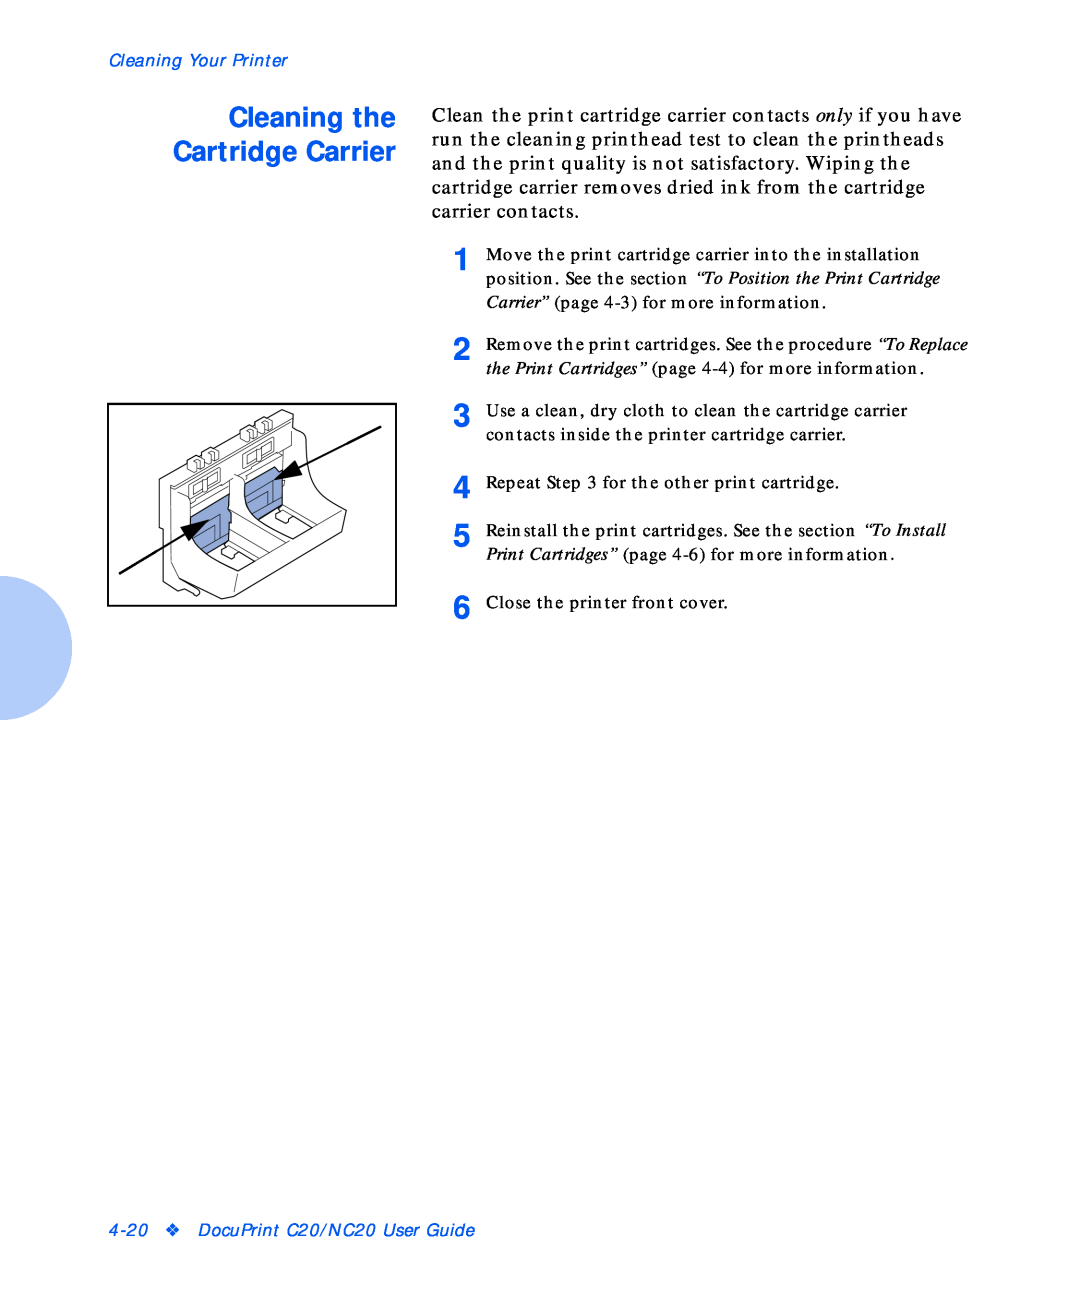 Xerox manual Cleaning the Cartridge Carrier, Cleaning Your Printer, DocuPrint C20/NC20 User Guide 